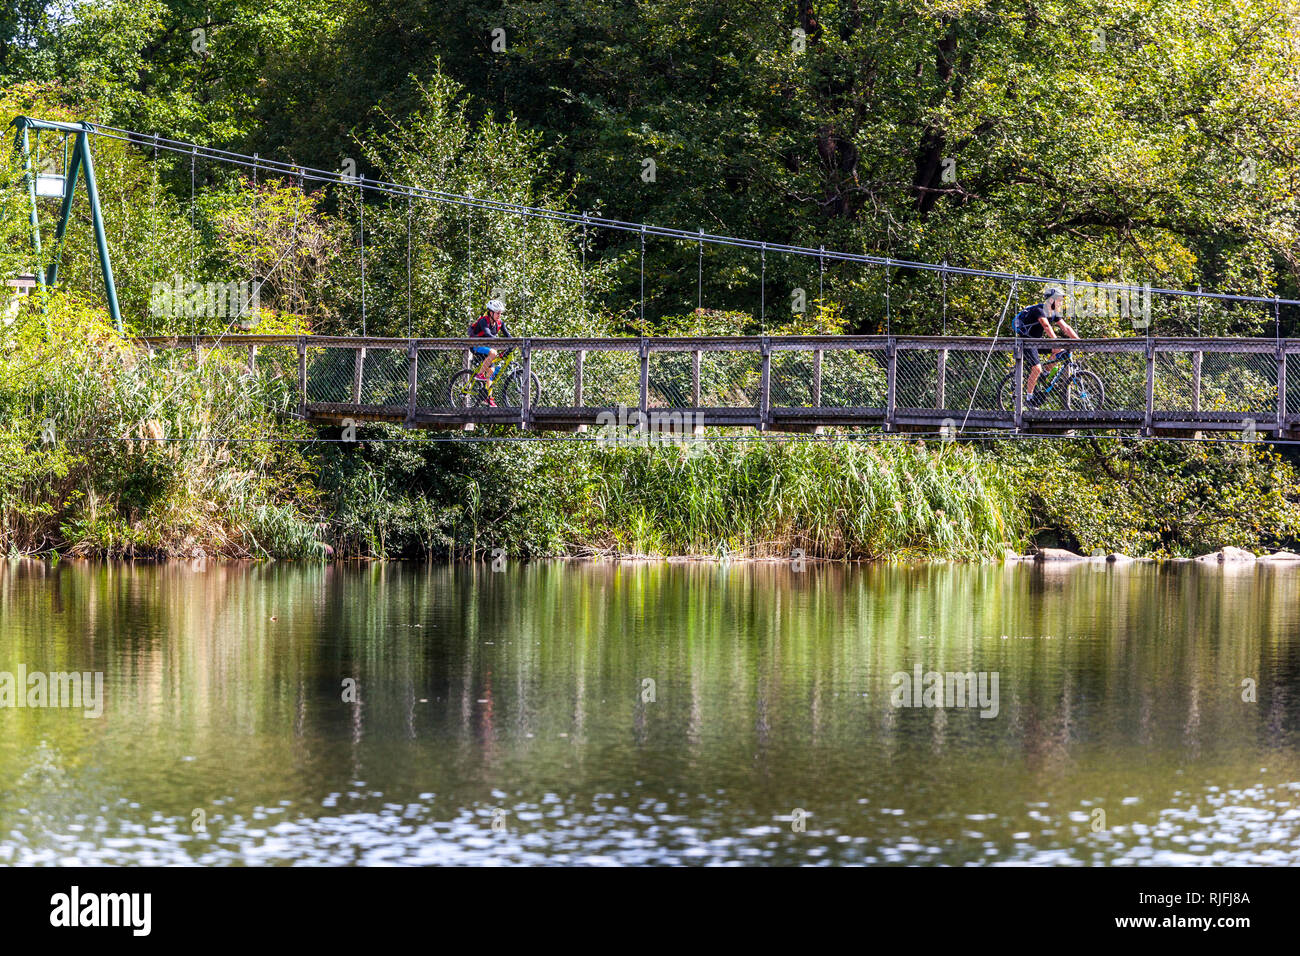 Cyclists on a trip ride on a foot-bridge across the Dyje River in Podyji National Park, South Moravia, Czech Republic footpath Stock Photo